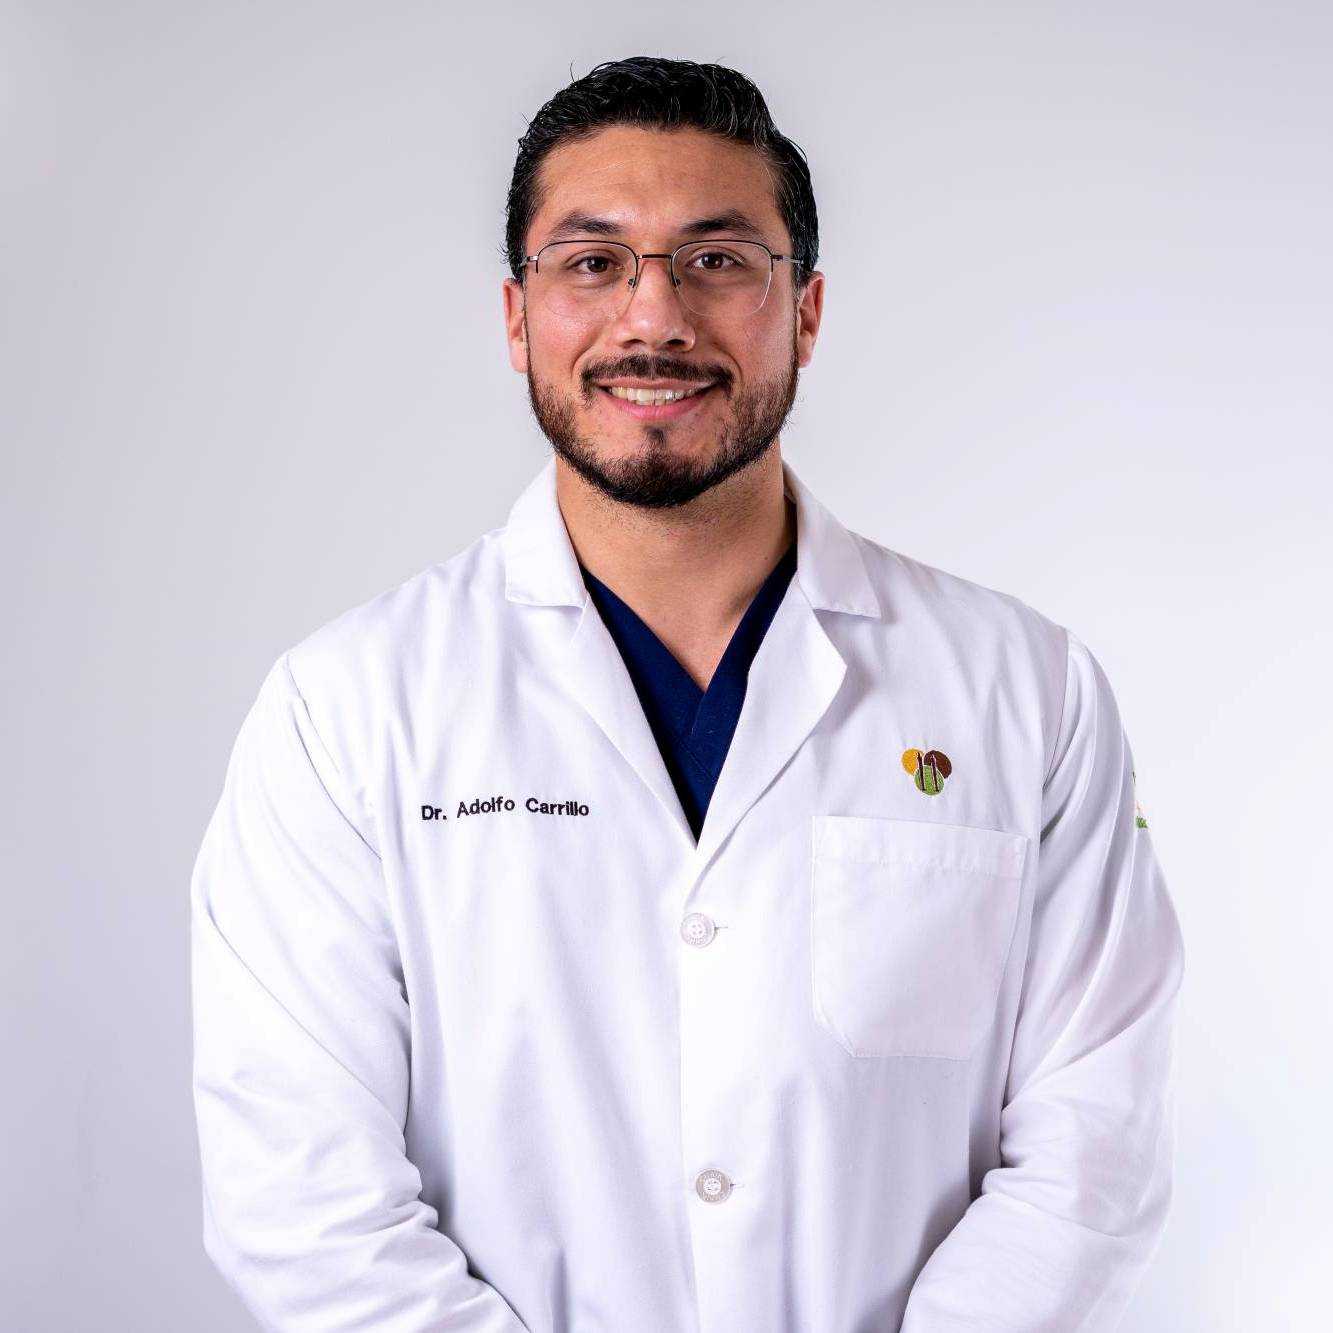 Dr. Adolfo Carrillo, M.D. - Treating Physician